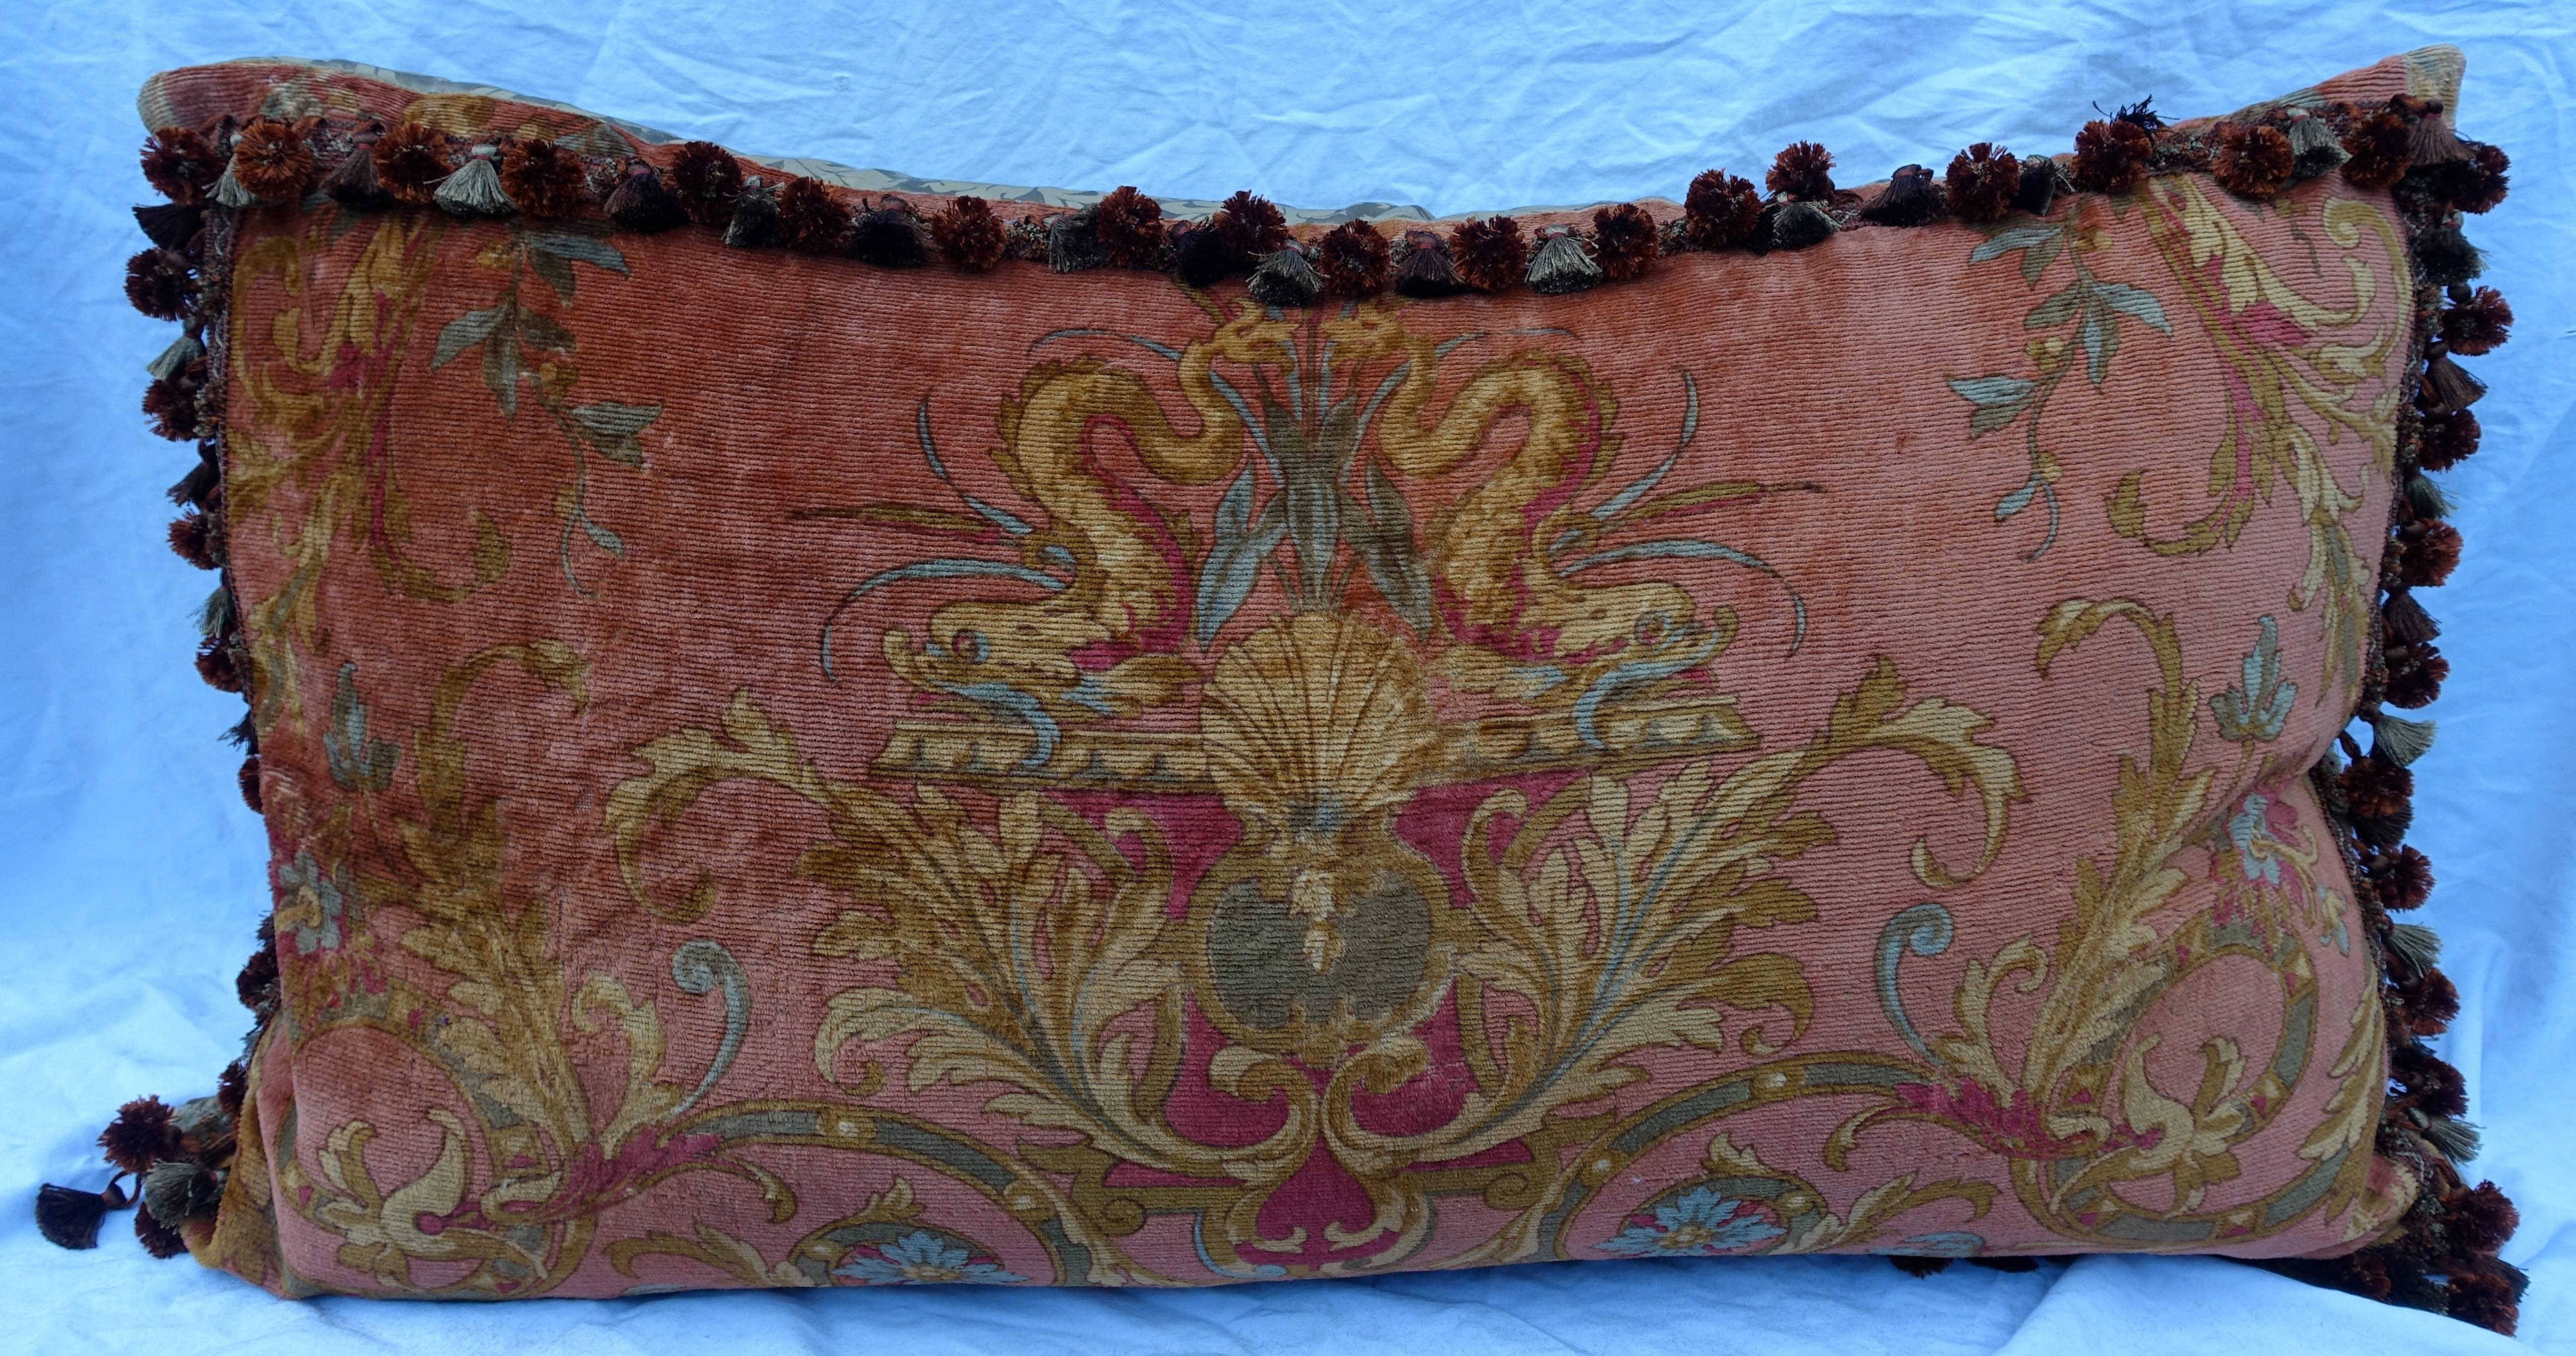 Custom bed pillow by Melissa Levinson made with early 20th century mohair velvet in lucious shades of sienna, rust, terra cotta, gold, blue and greens. The design depicts a pair of dolphins flanking a shell and are surrounded by swirling acanthus